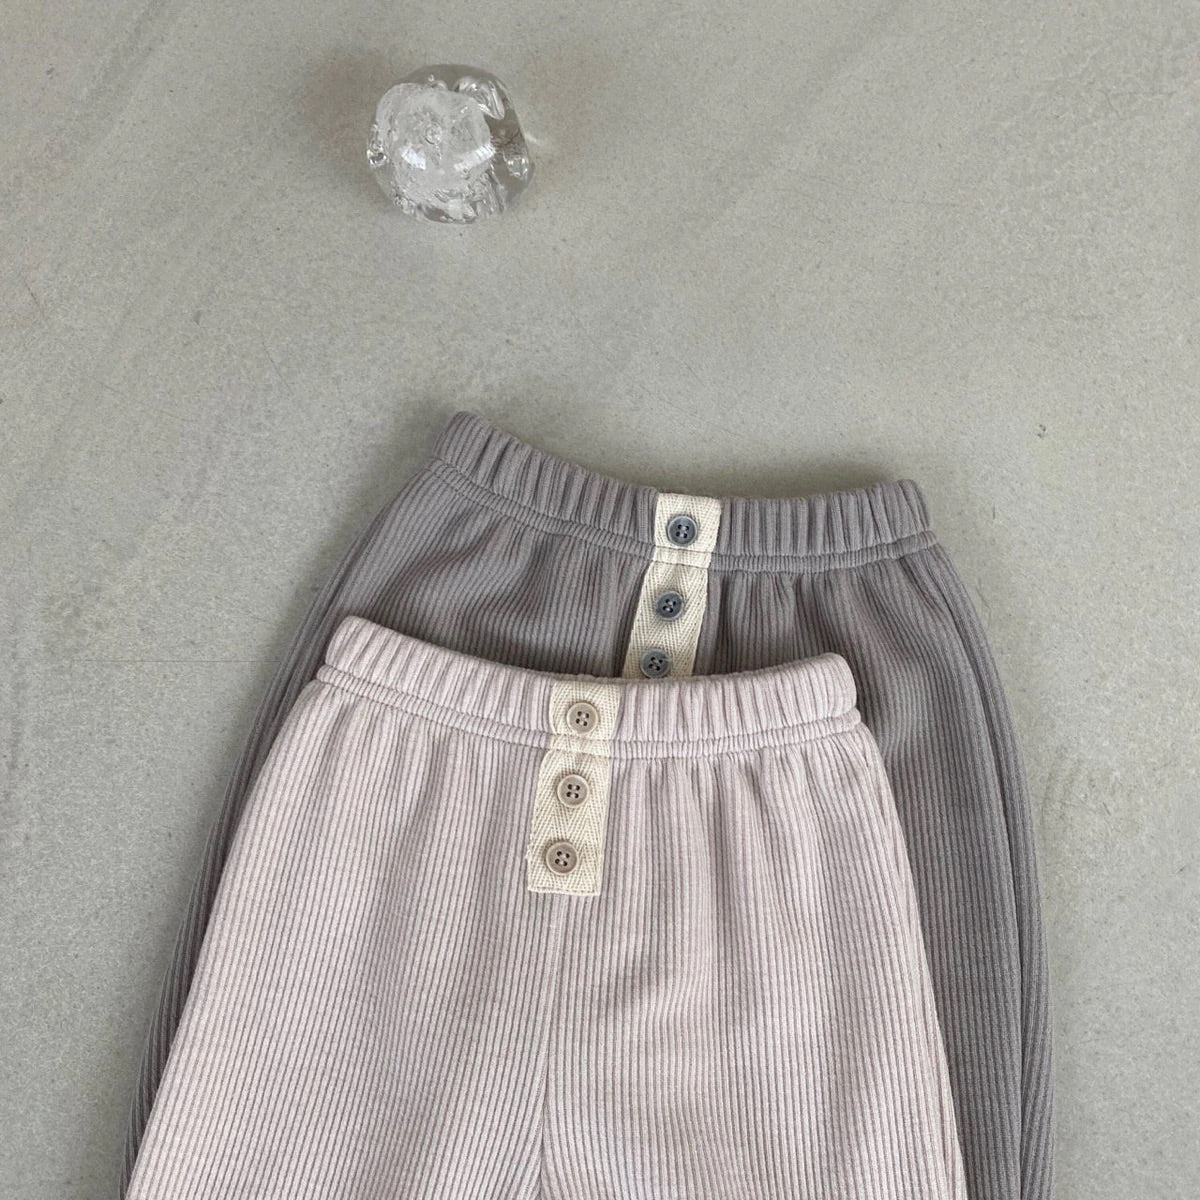 Vera Rib Pants find Stylish Fashion for Little People- at Little Foxx Concept Store